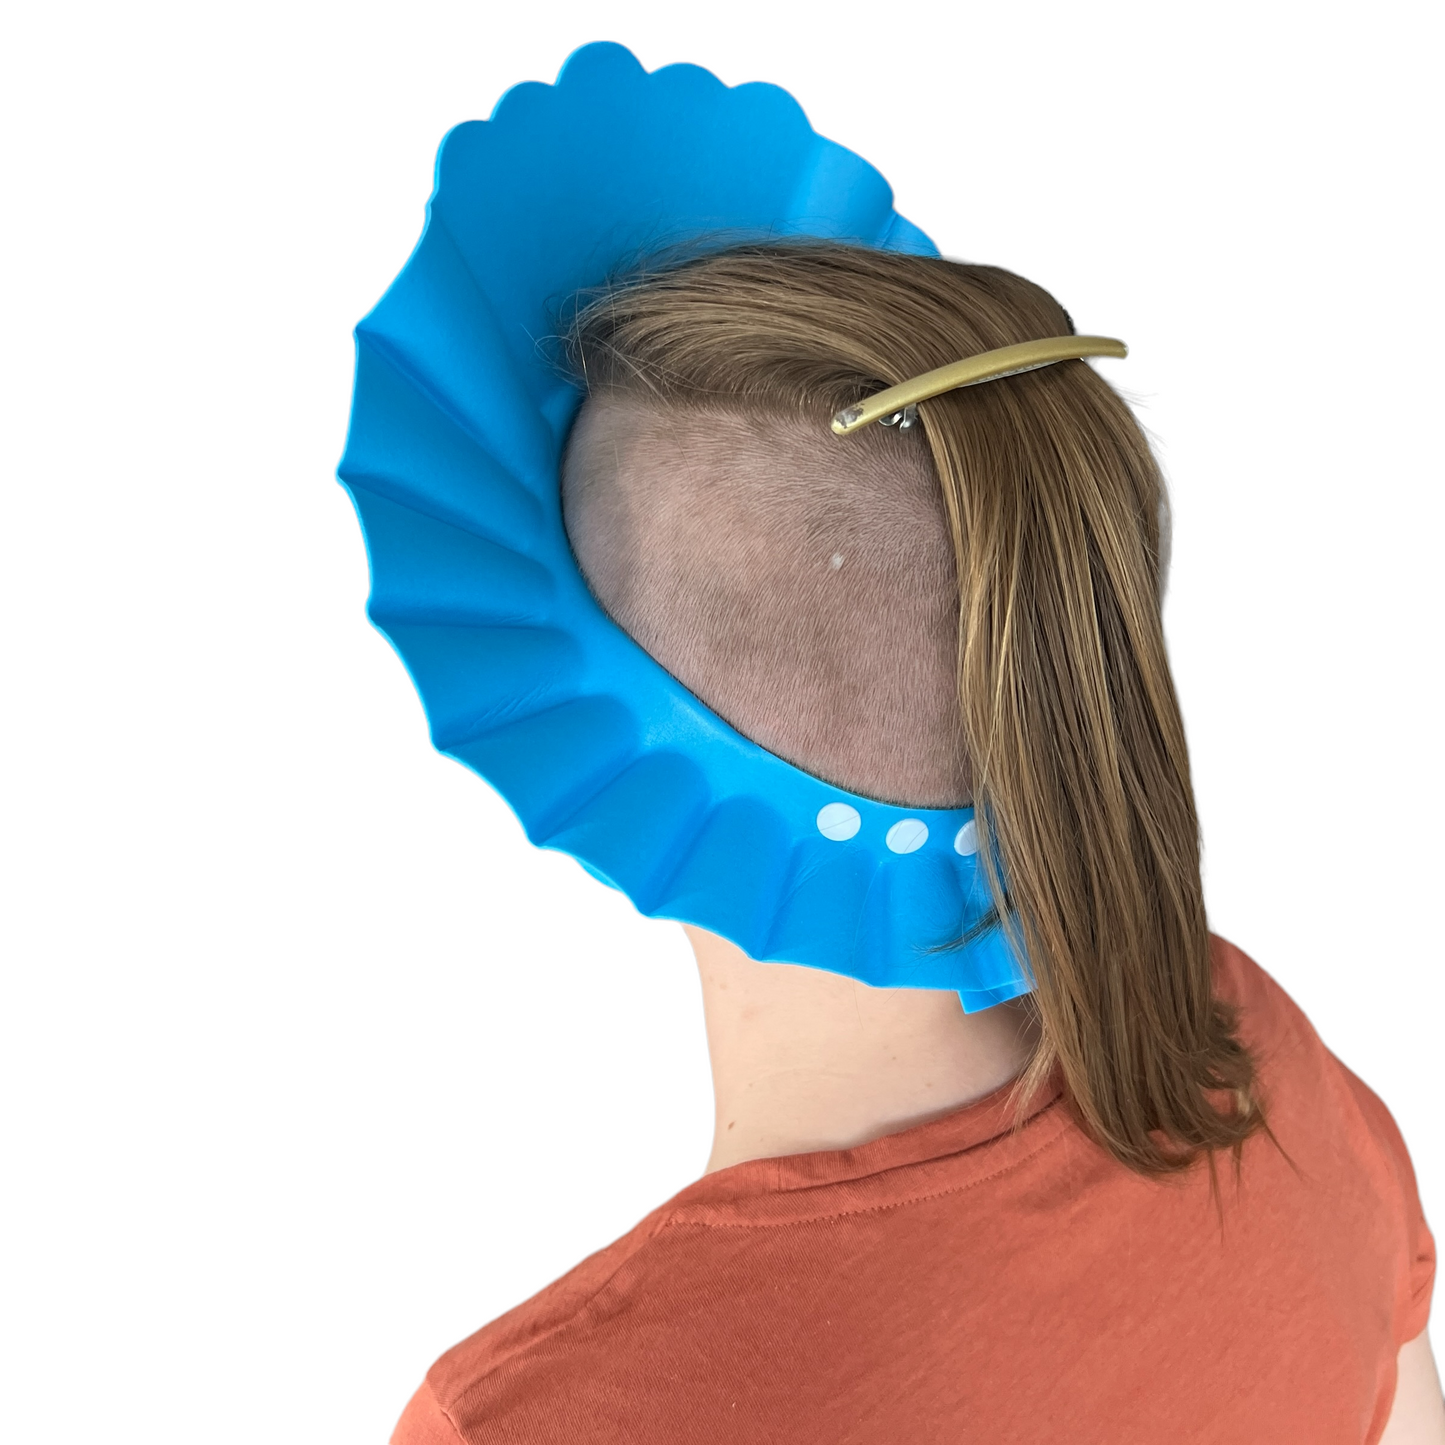 Face Protector for showers, bath and hair washing